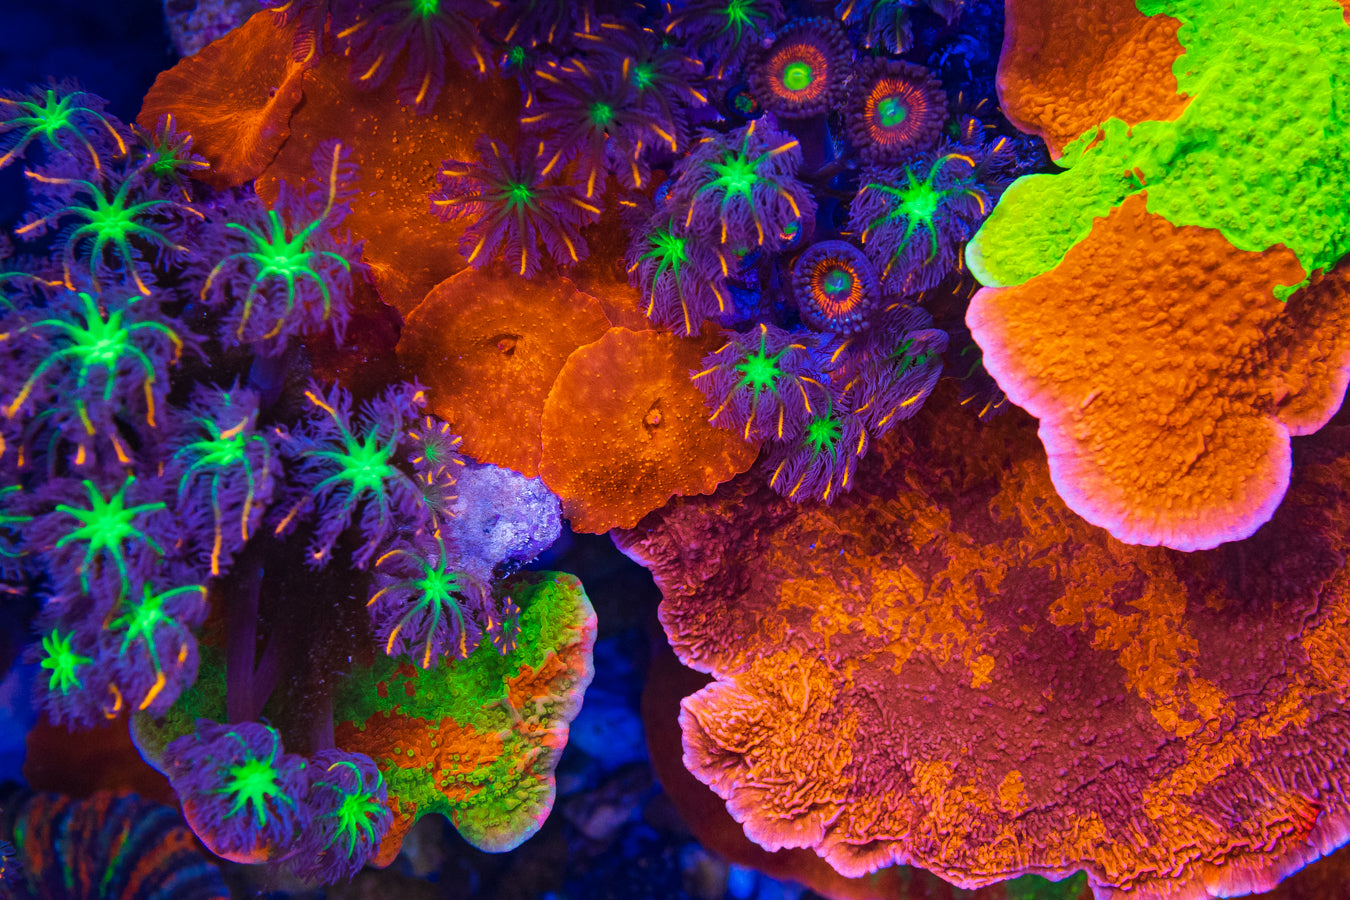 Buy Corals, Supplies, Fish and Inverts for your Reef